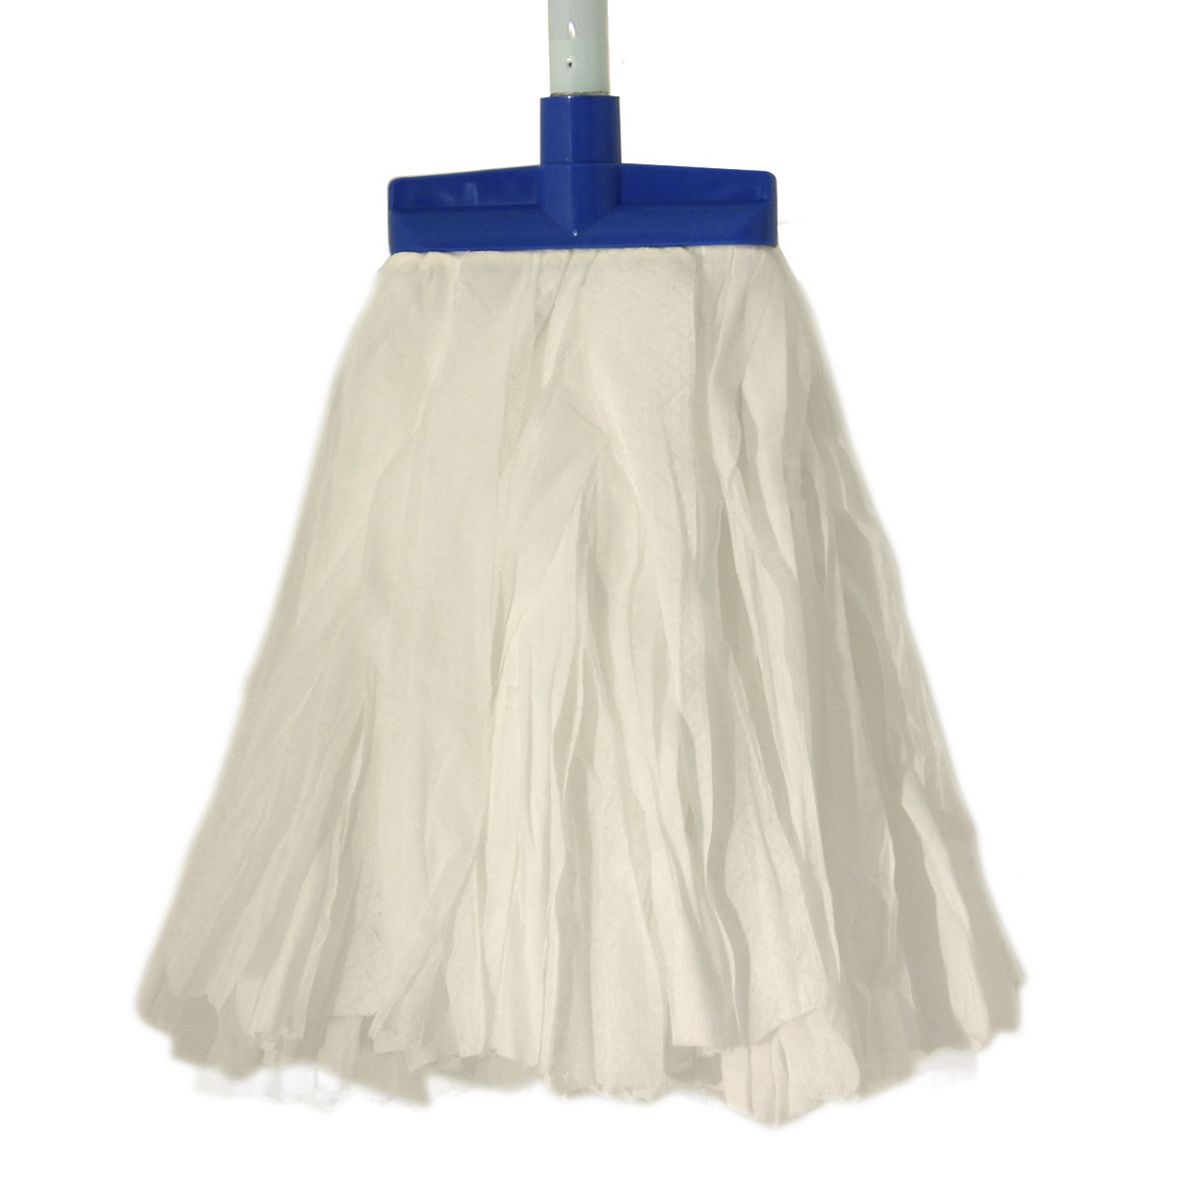 RS PRO 28.5cm Blue Mop Head for use with Handle Code:2186718